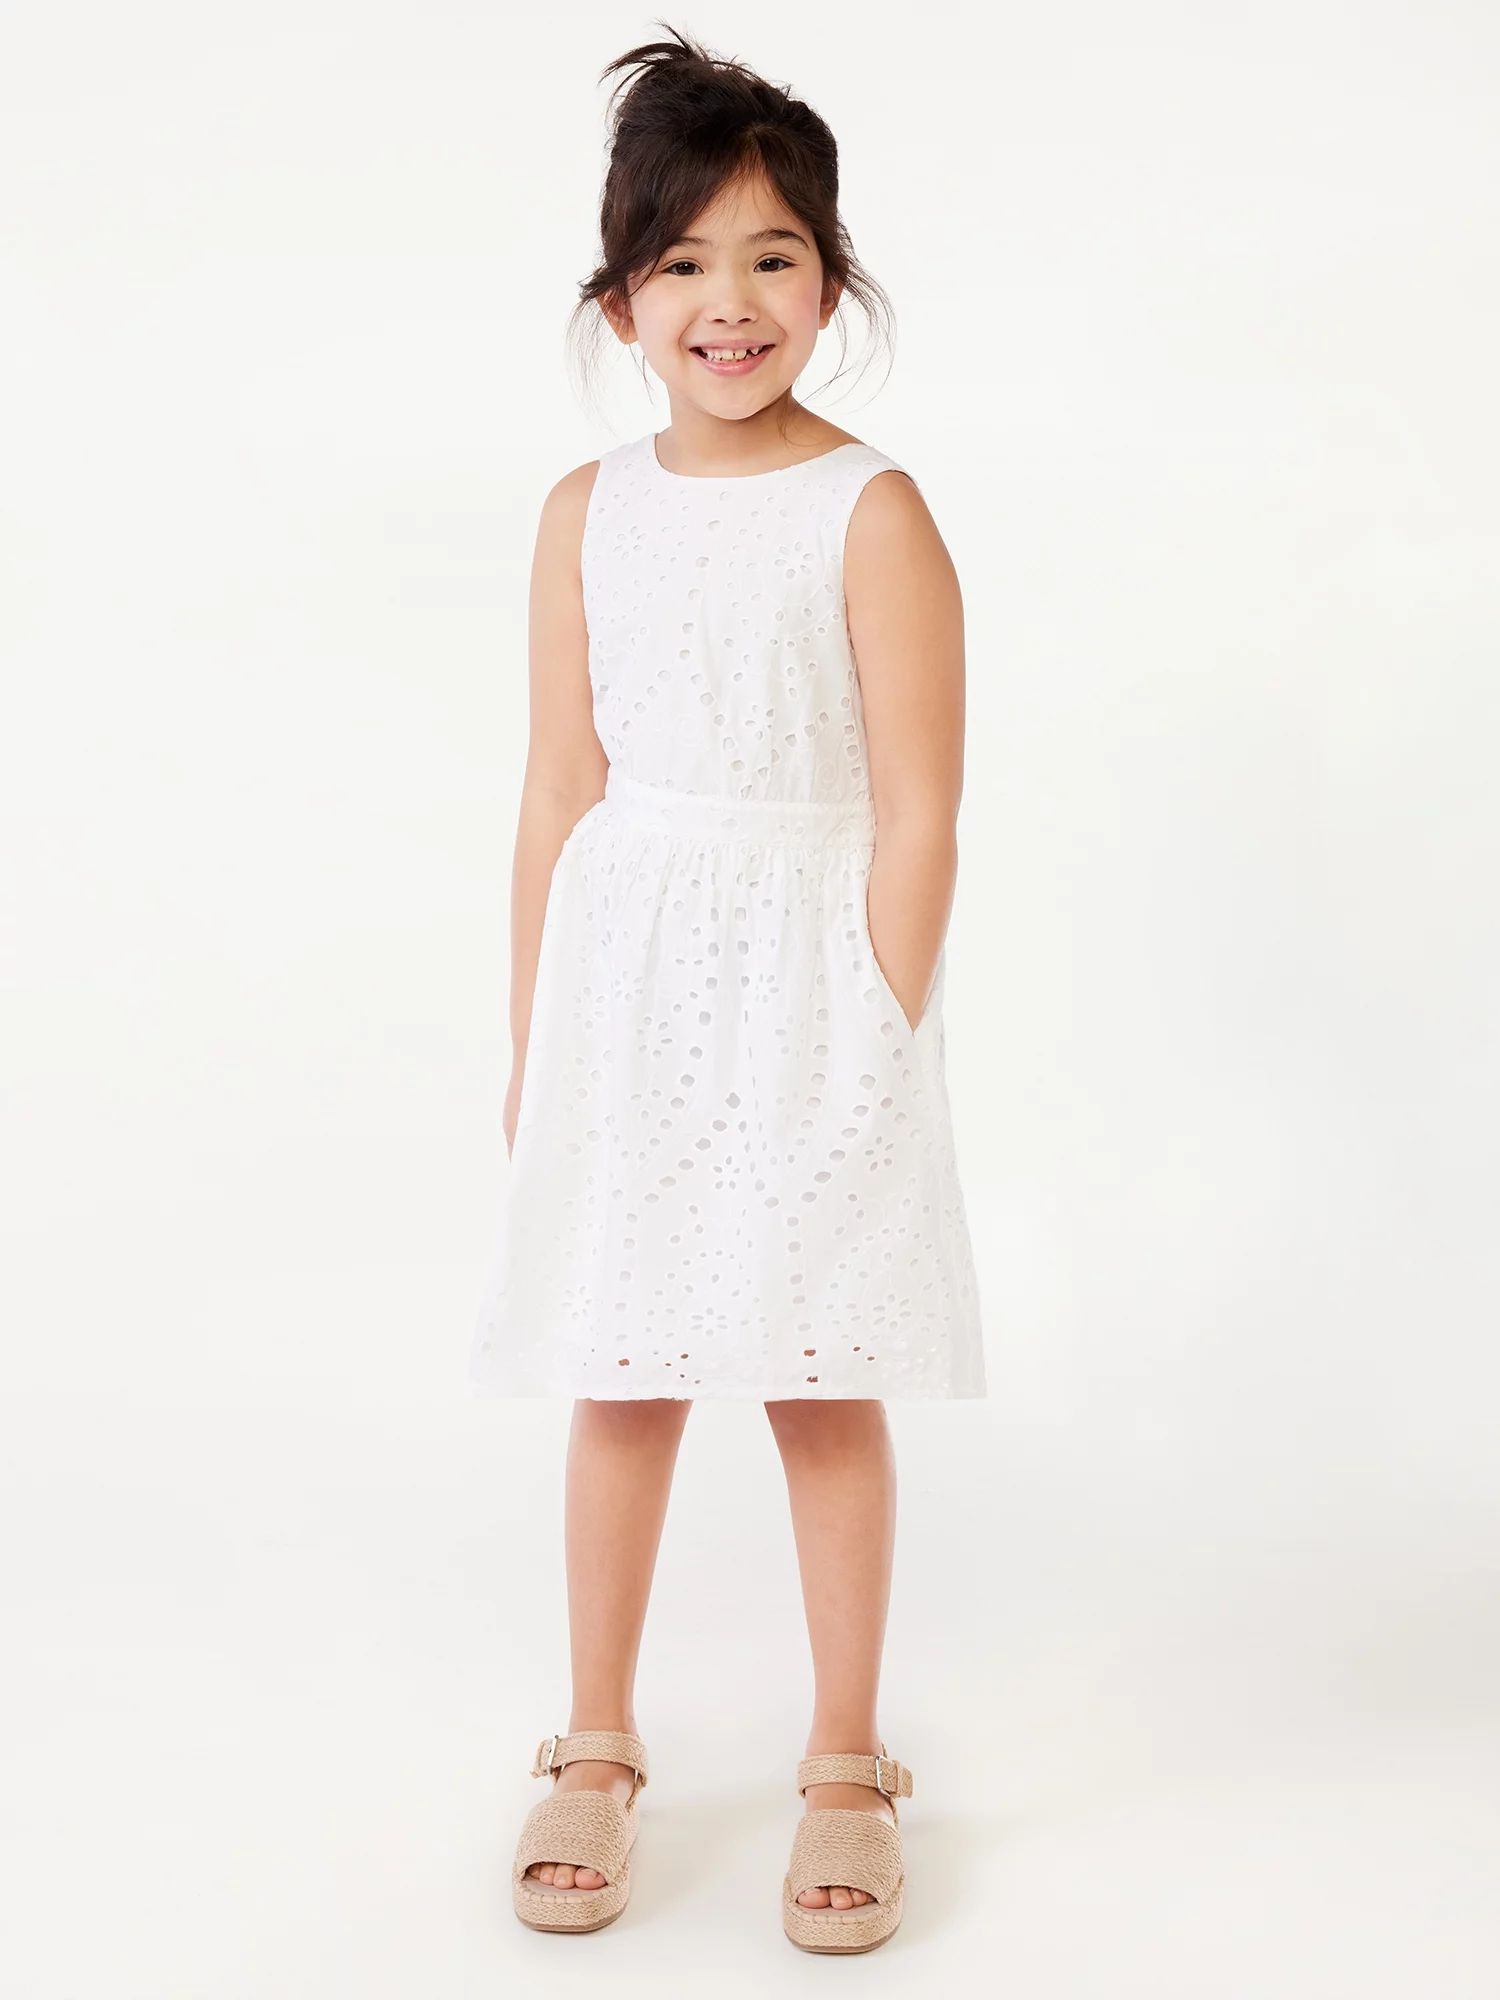 Scoop Girls Sleeveless Eyelet Fit and Flare Dress with Bow Back, Sizes 4-16 | Walmart (US)